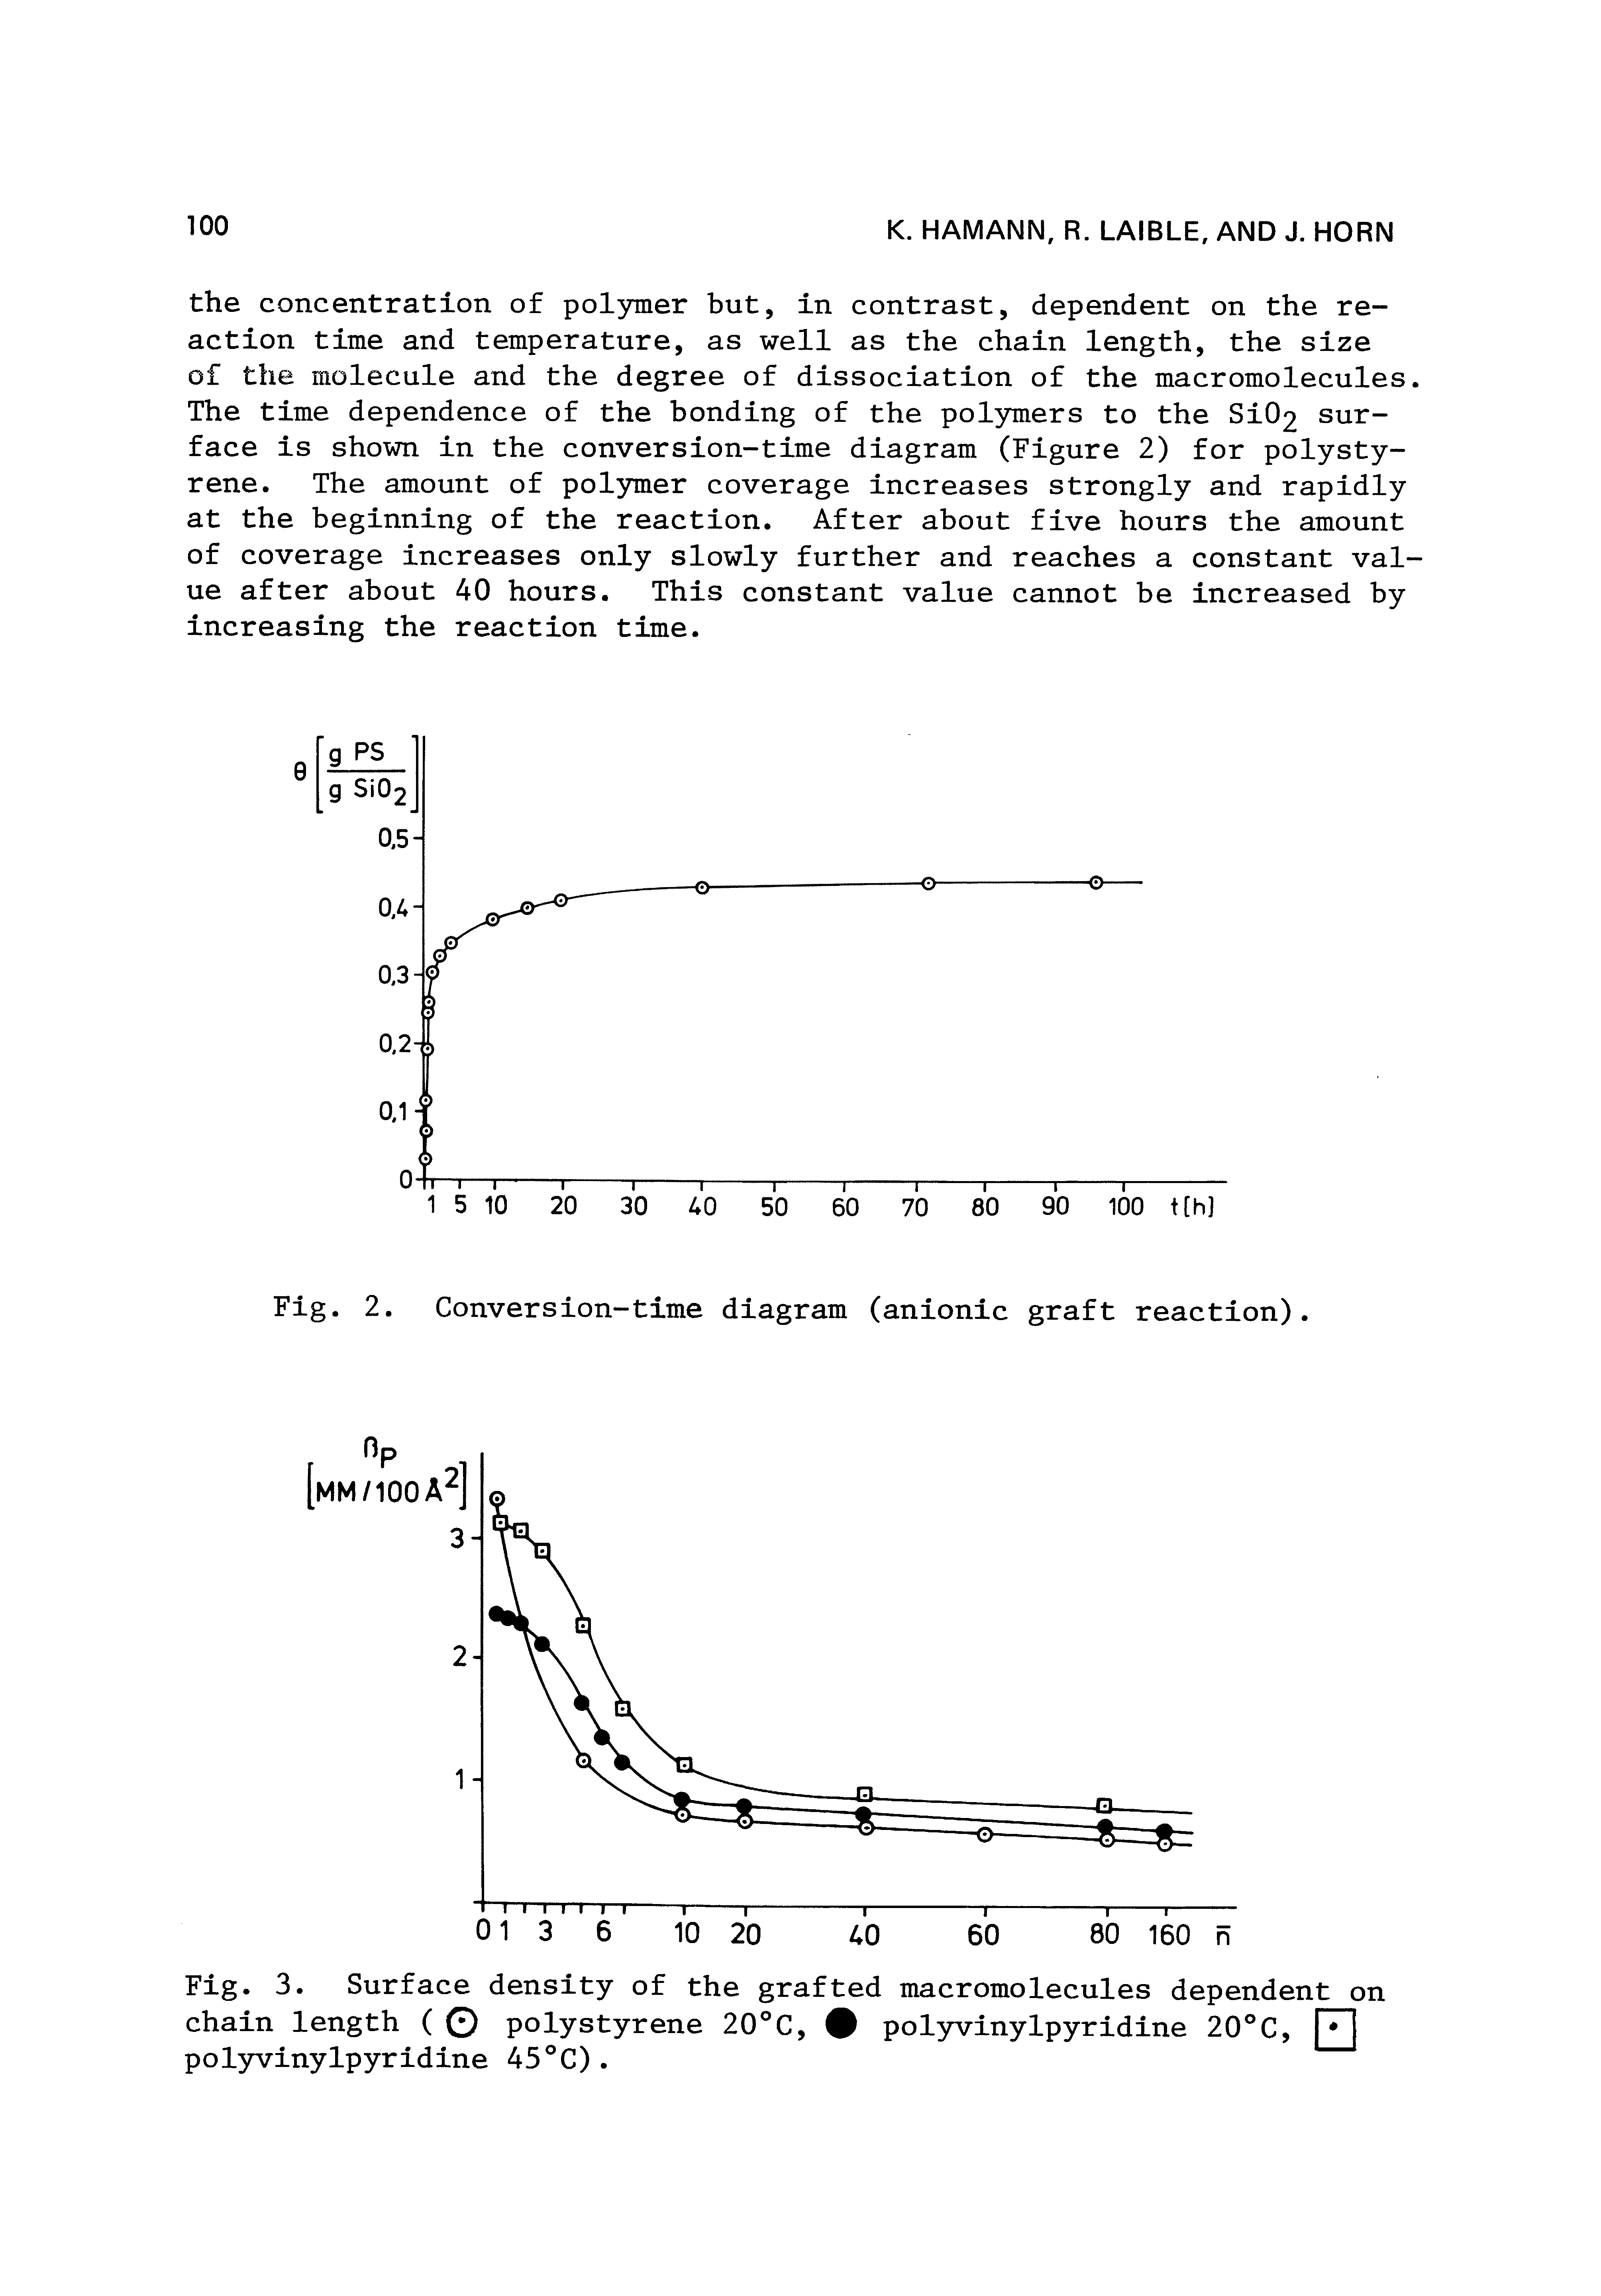 Fig. 3. Surface density of the grafted macromolecules dependent on chain length ( O polystyrene 20°C, polyvinylpyridine 20°C, p ] polyvinylpyridine 45 C).